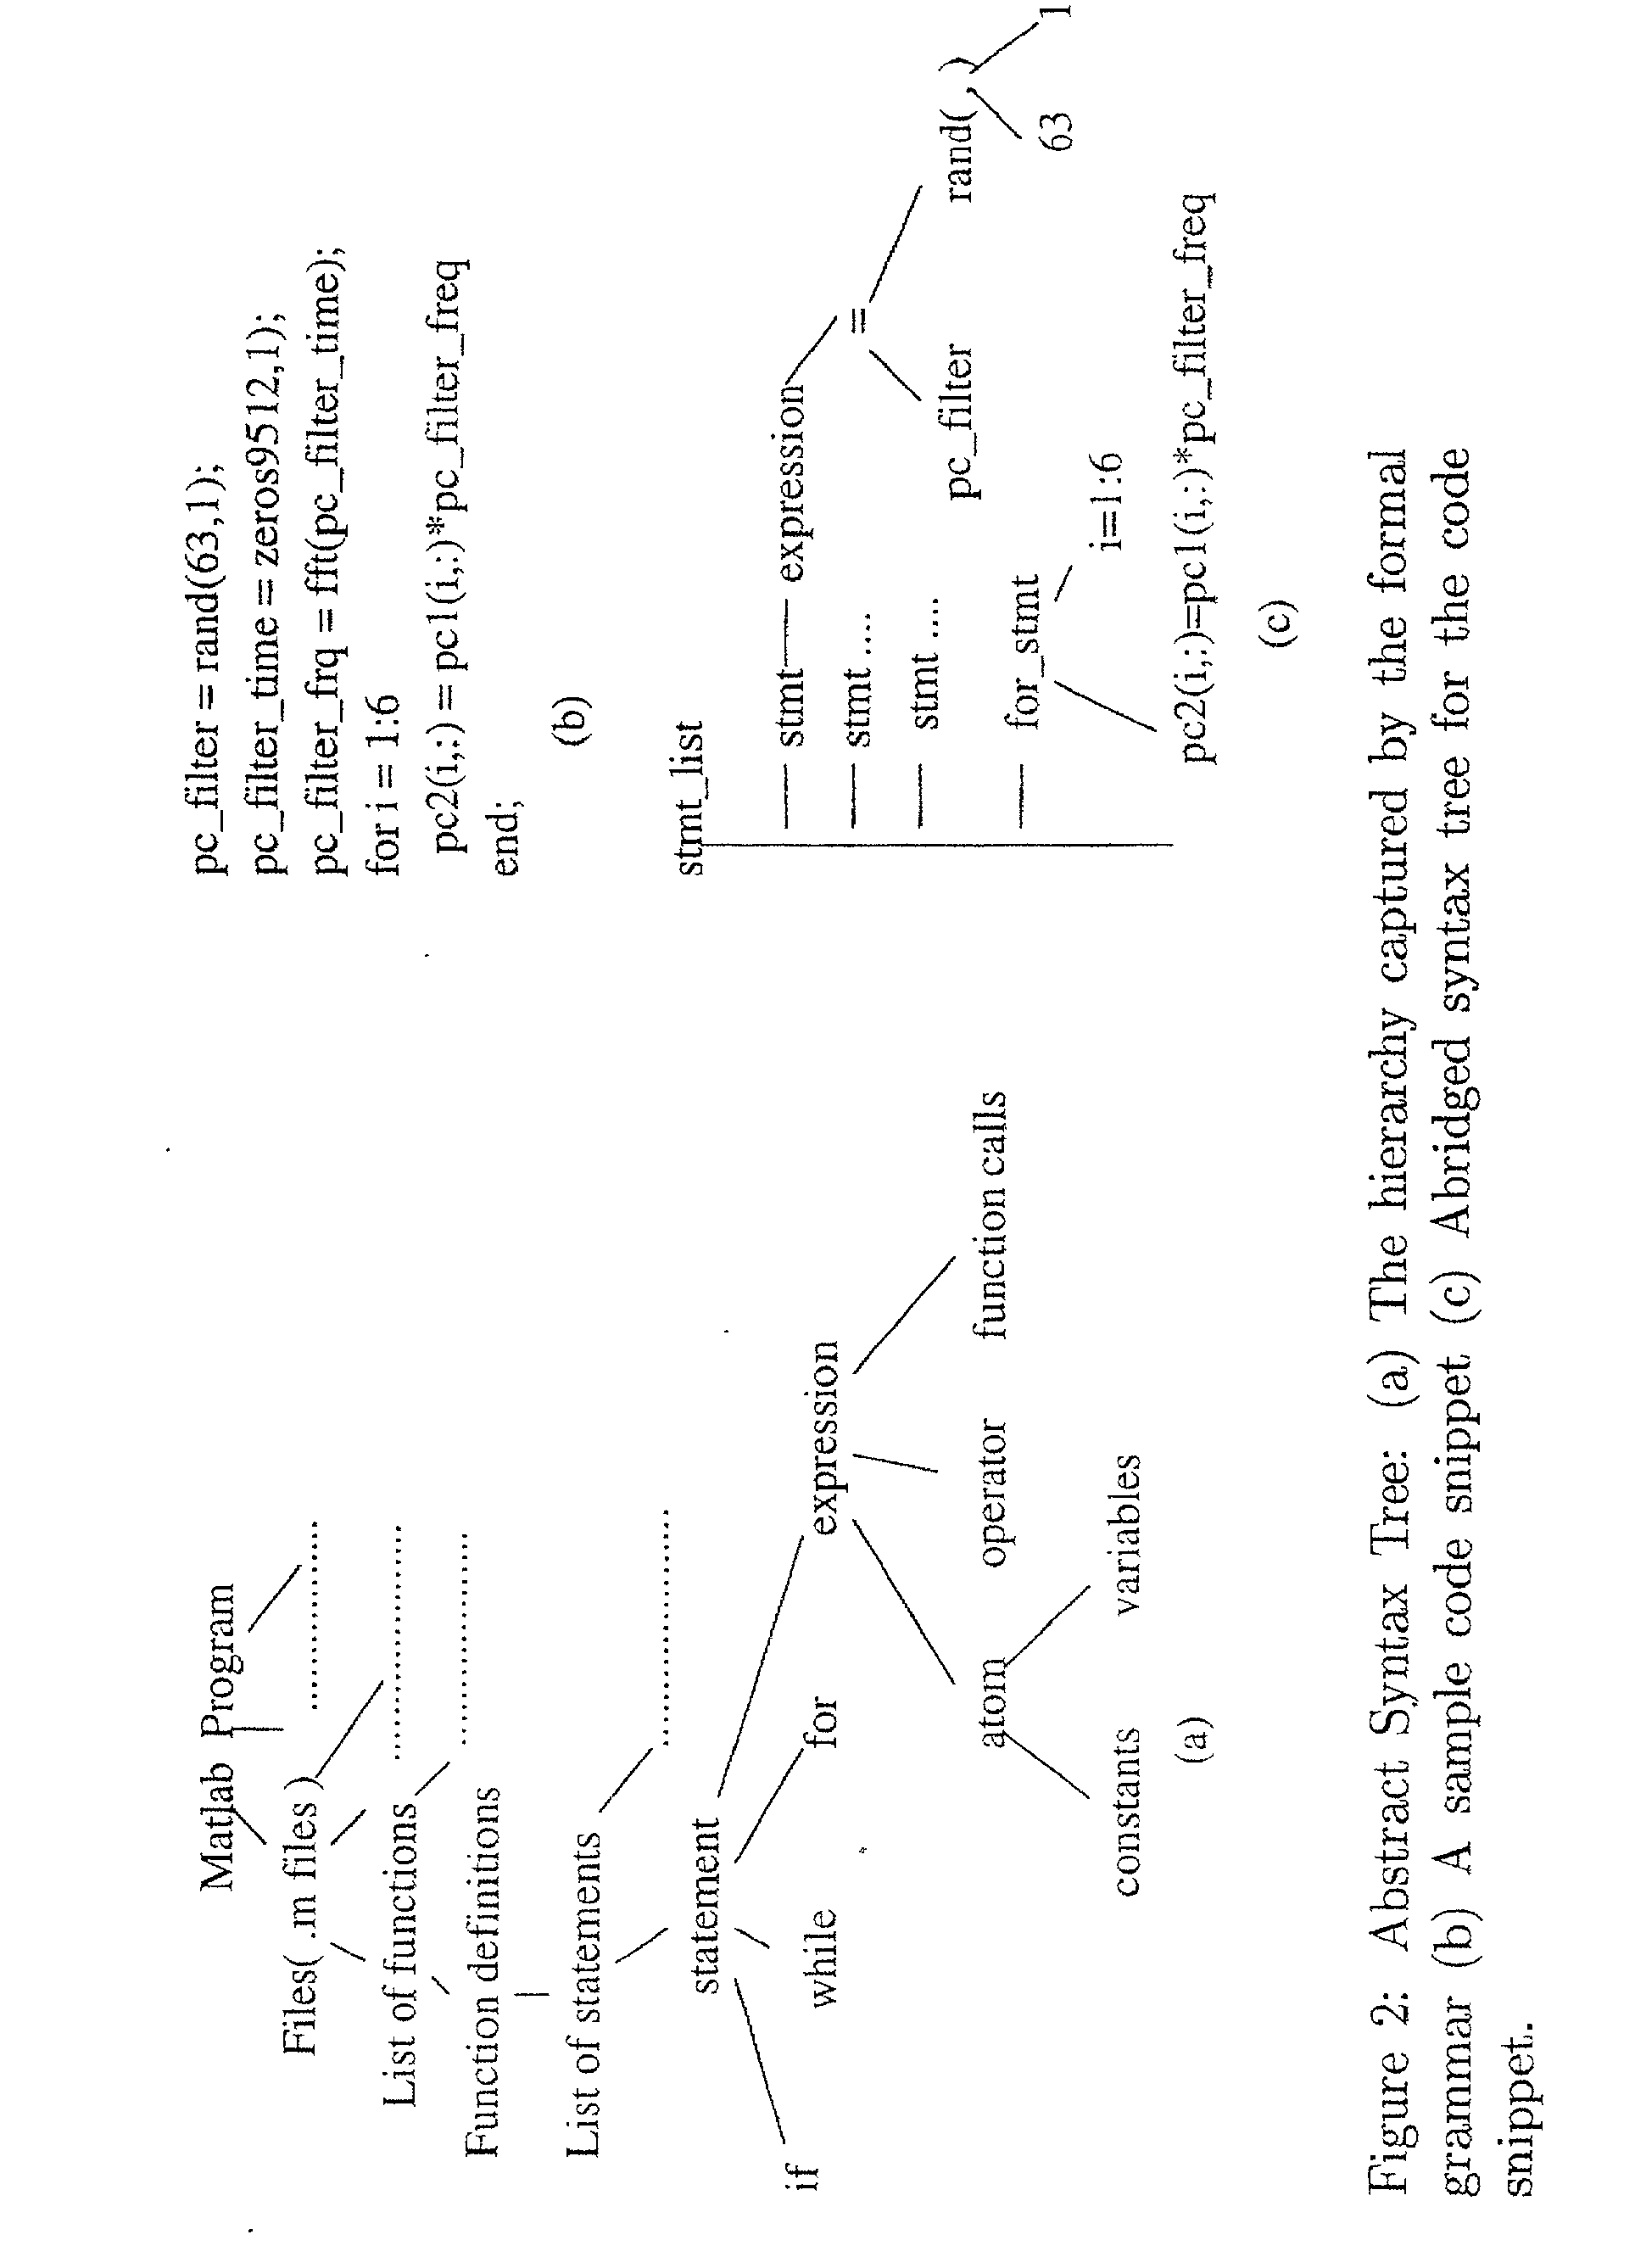 Method and apparatus for automatically generating hardware from algorithms described in matlab